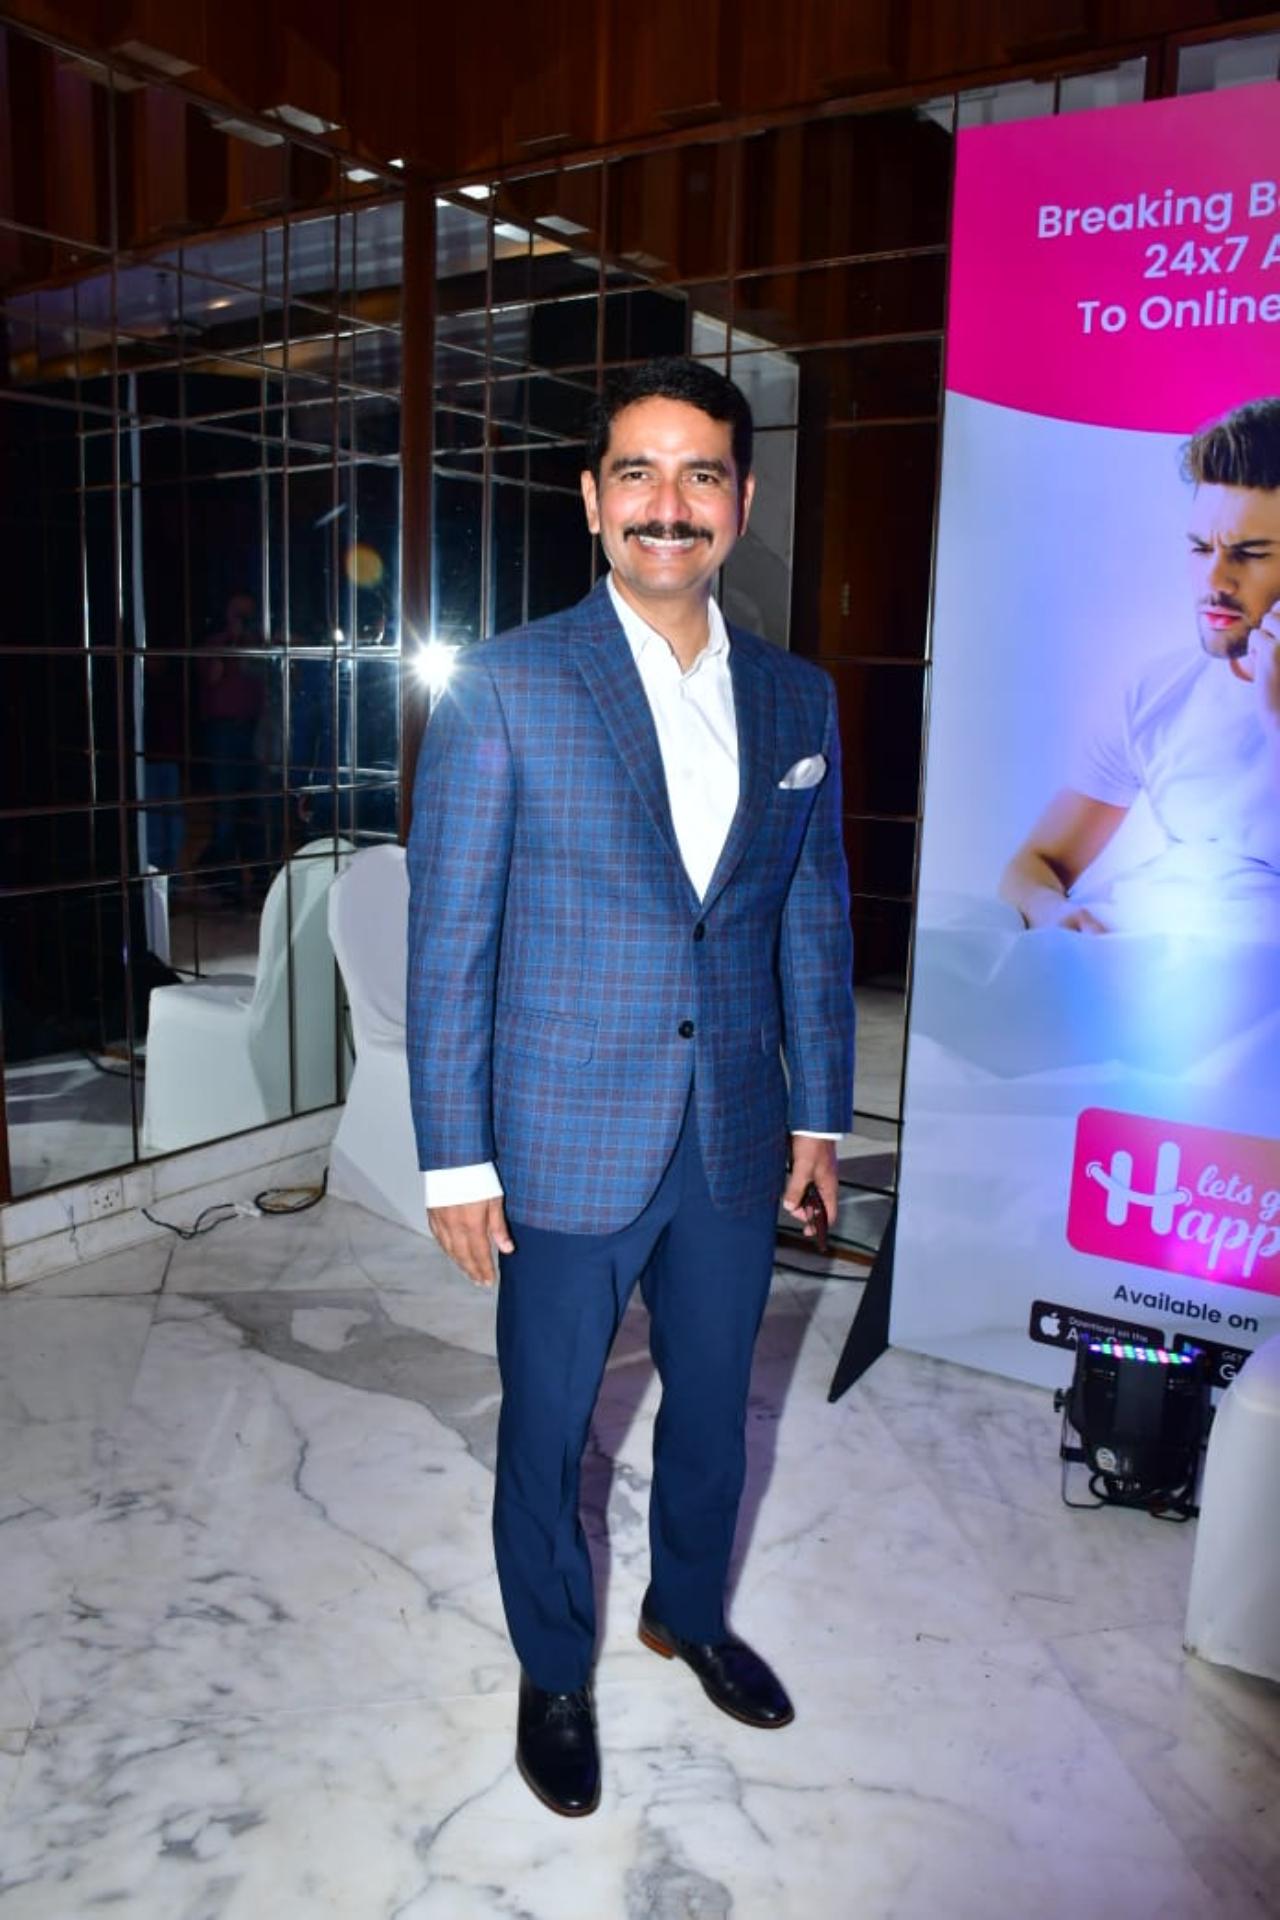 Vishwas Nangre Patil looked dapper in his blue suit at the app launch event